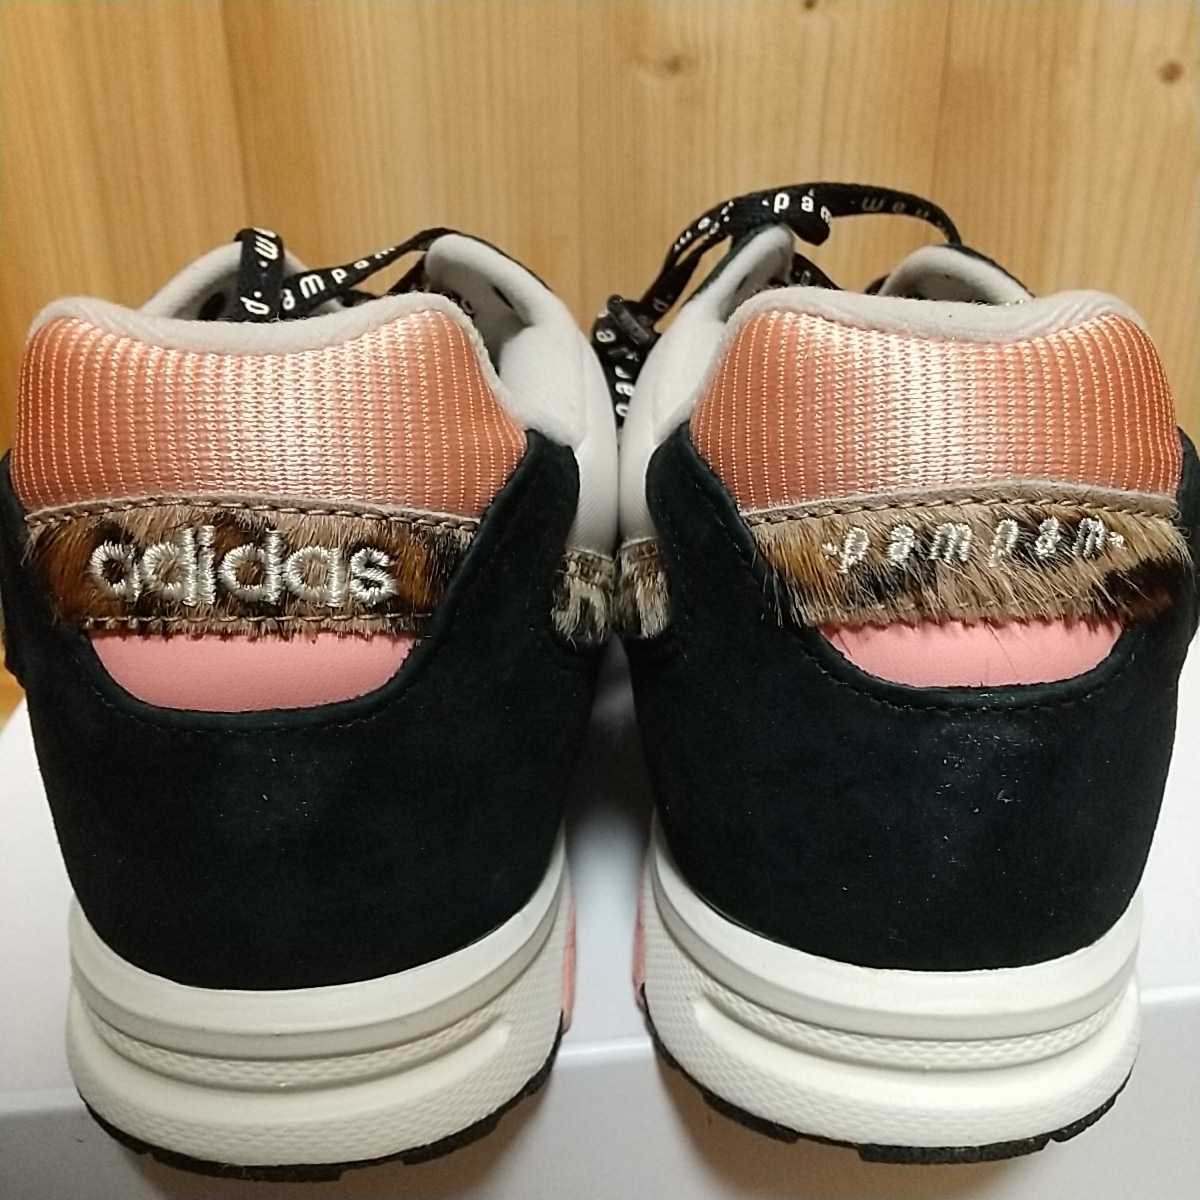 28cm 正規品 adidas ZX 1000 PAM PAM CLEAR BROWN/TRACE PINK/CORE 